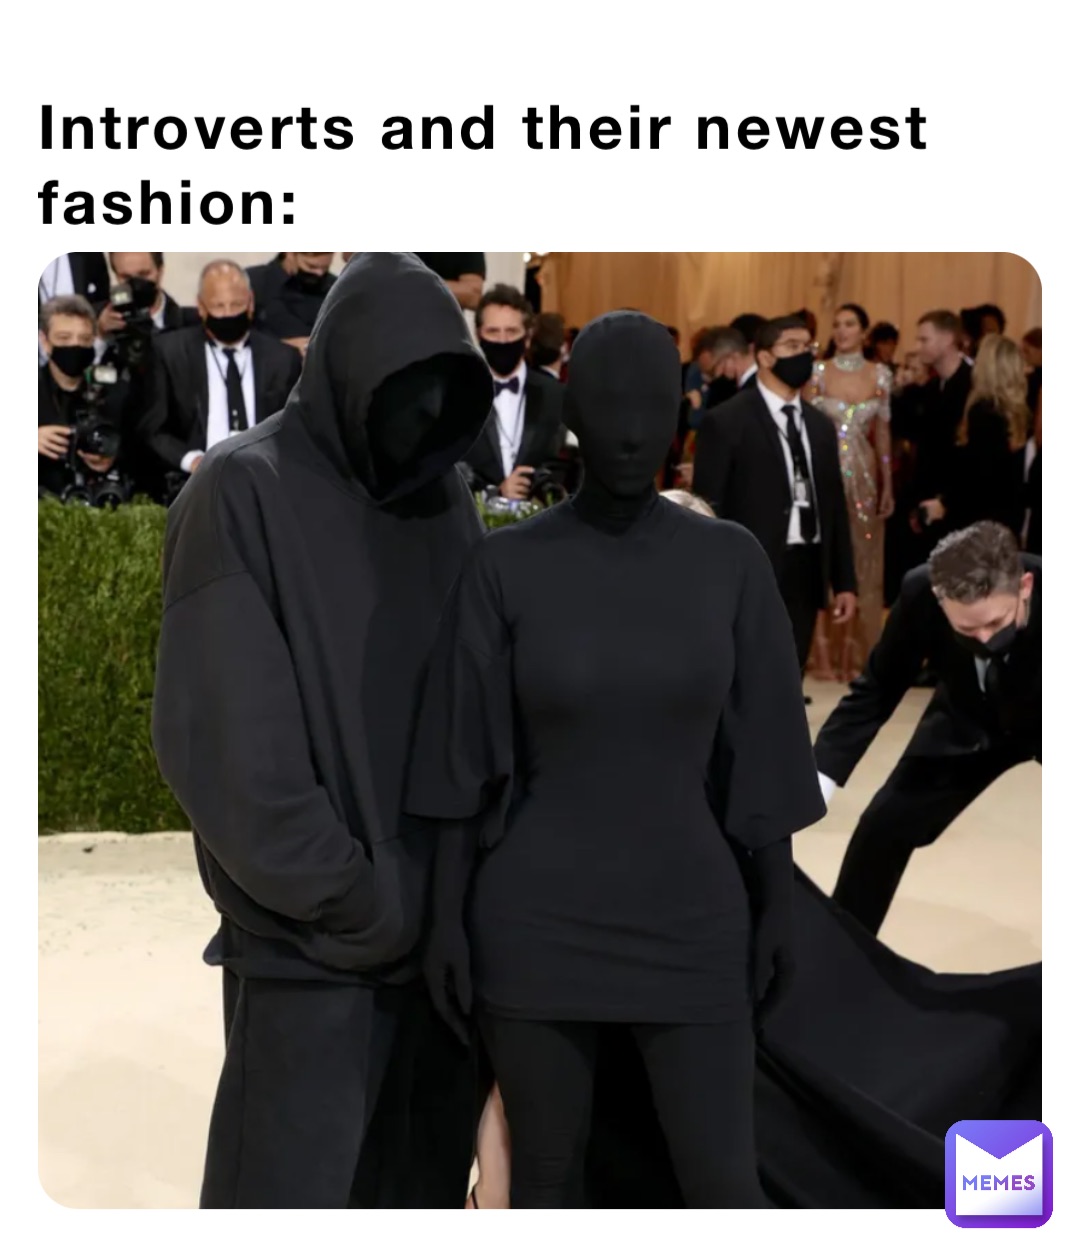 Introverts and their newest fashion: